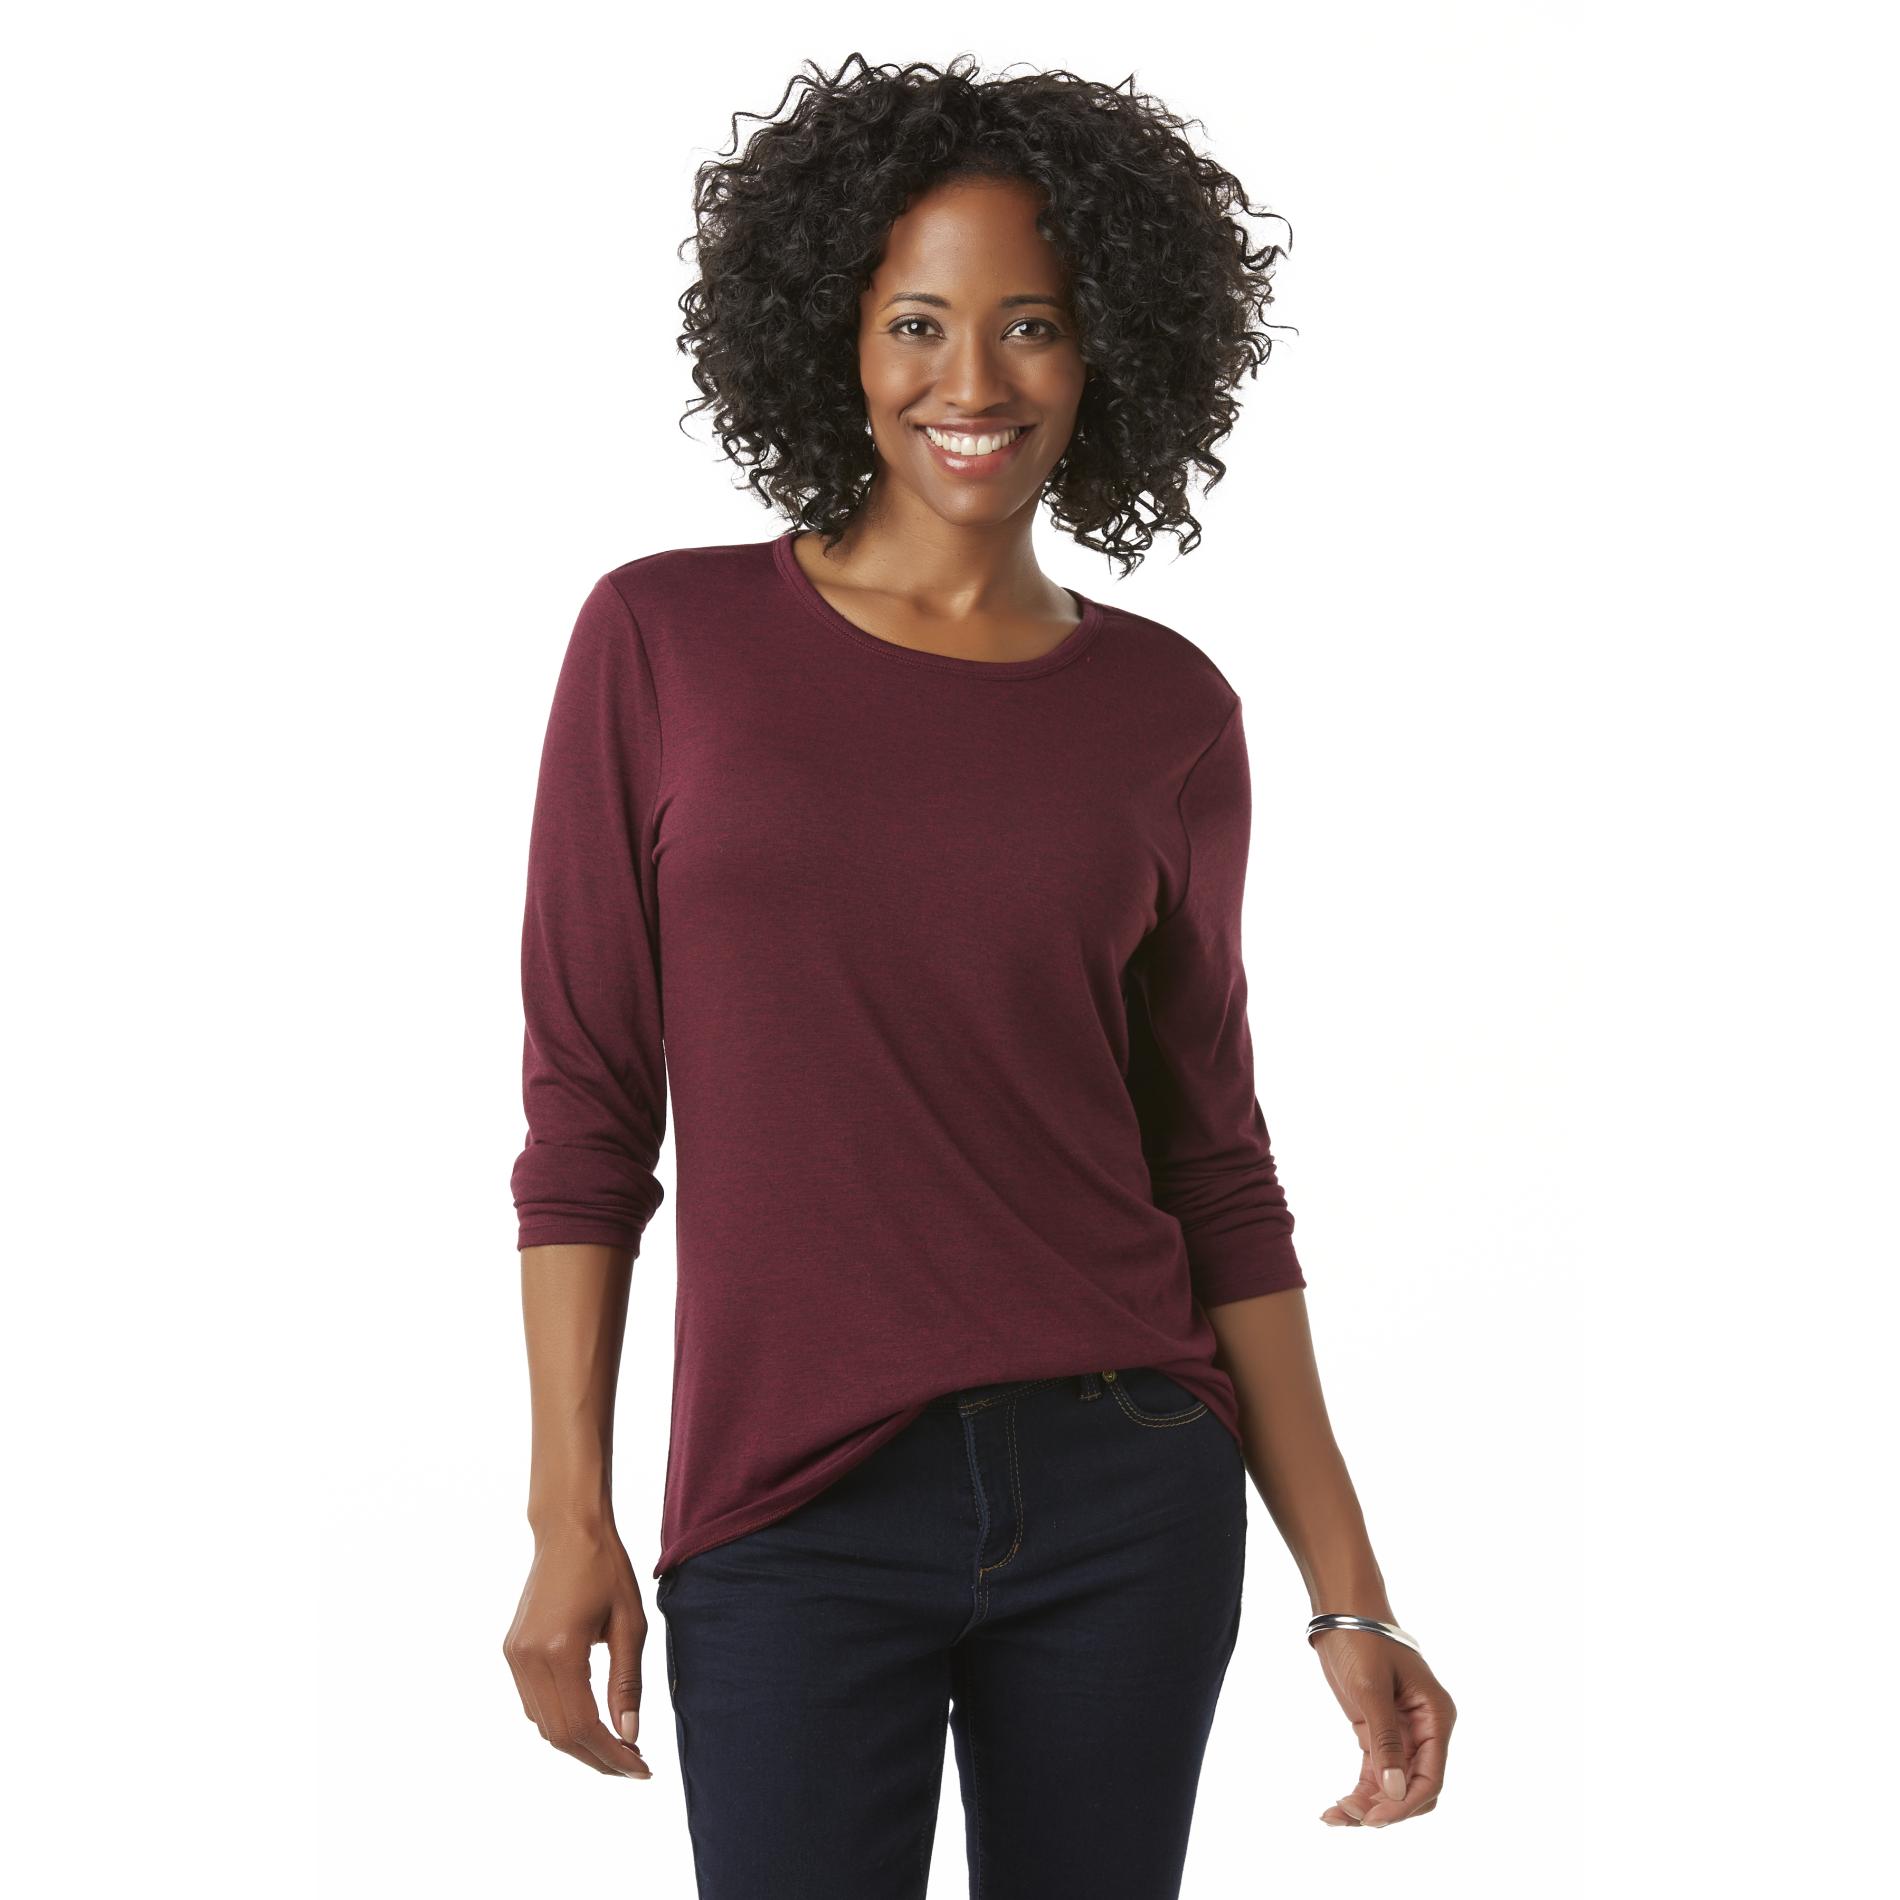 Simply Styled Women's Long-Sleeve Top - Heathered